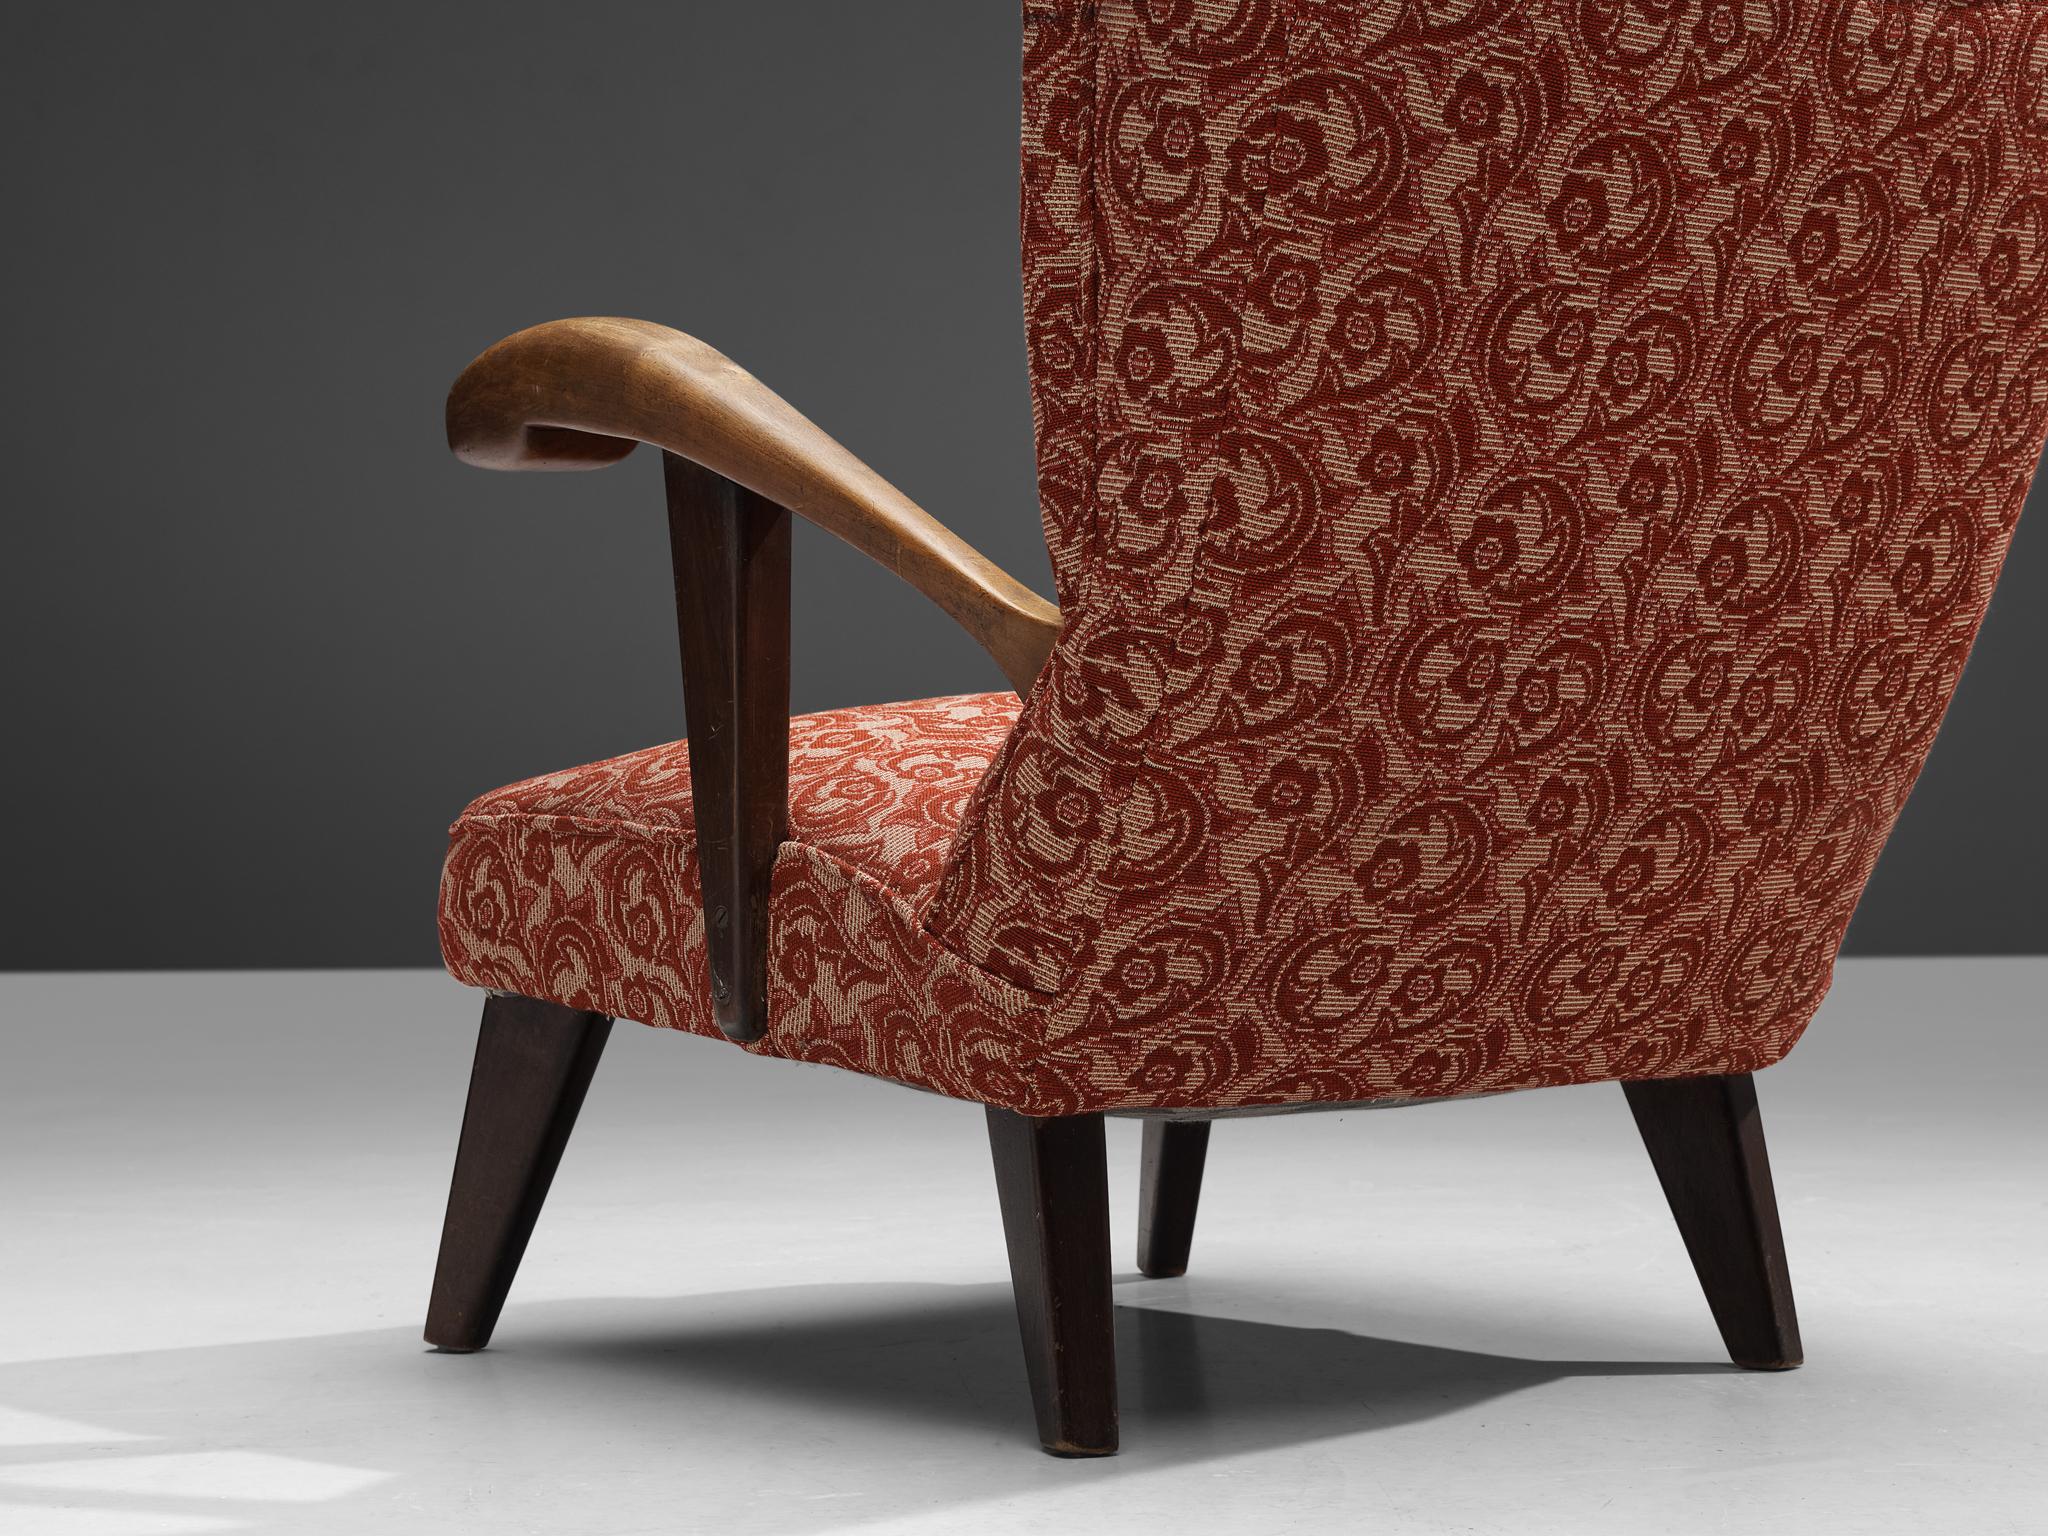 Mid-20th Century Sculpted Lounge Chair in Walnut and Red Floral Upholstery For Sale